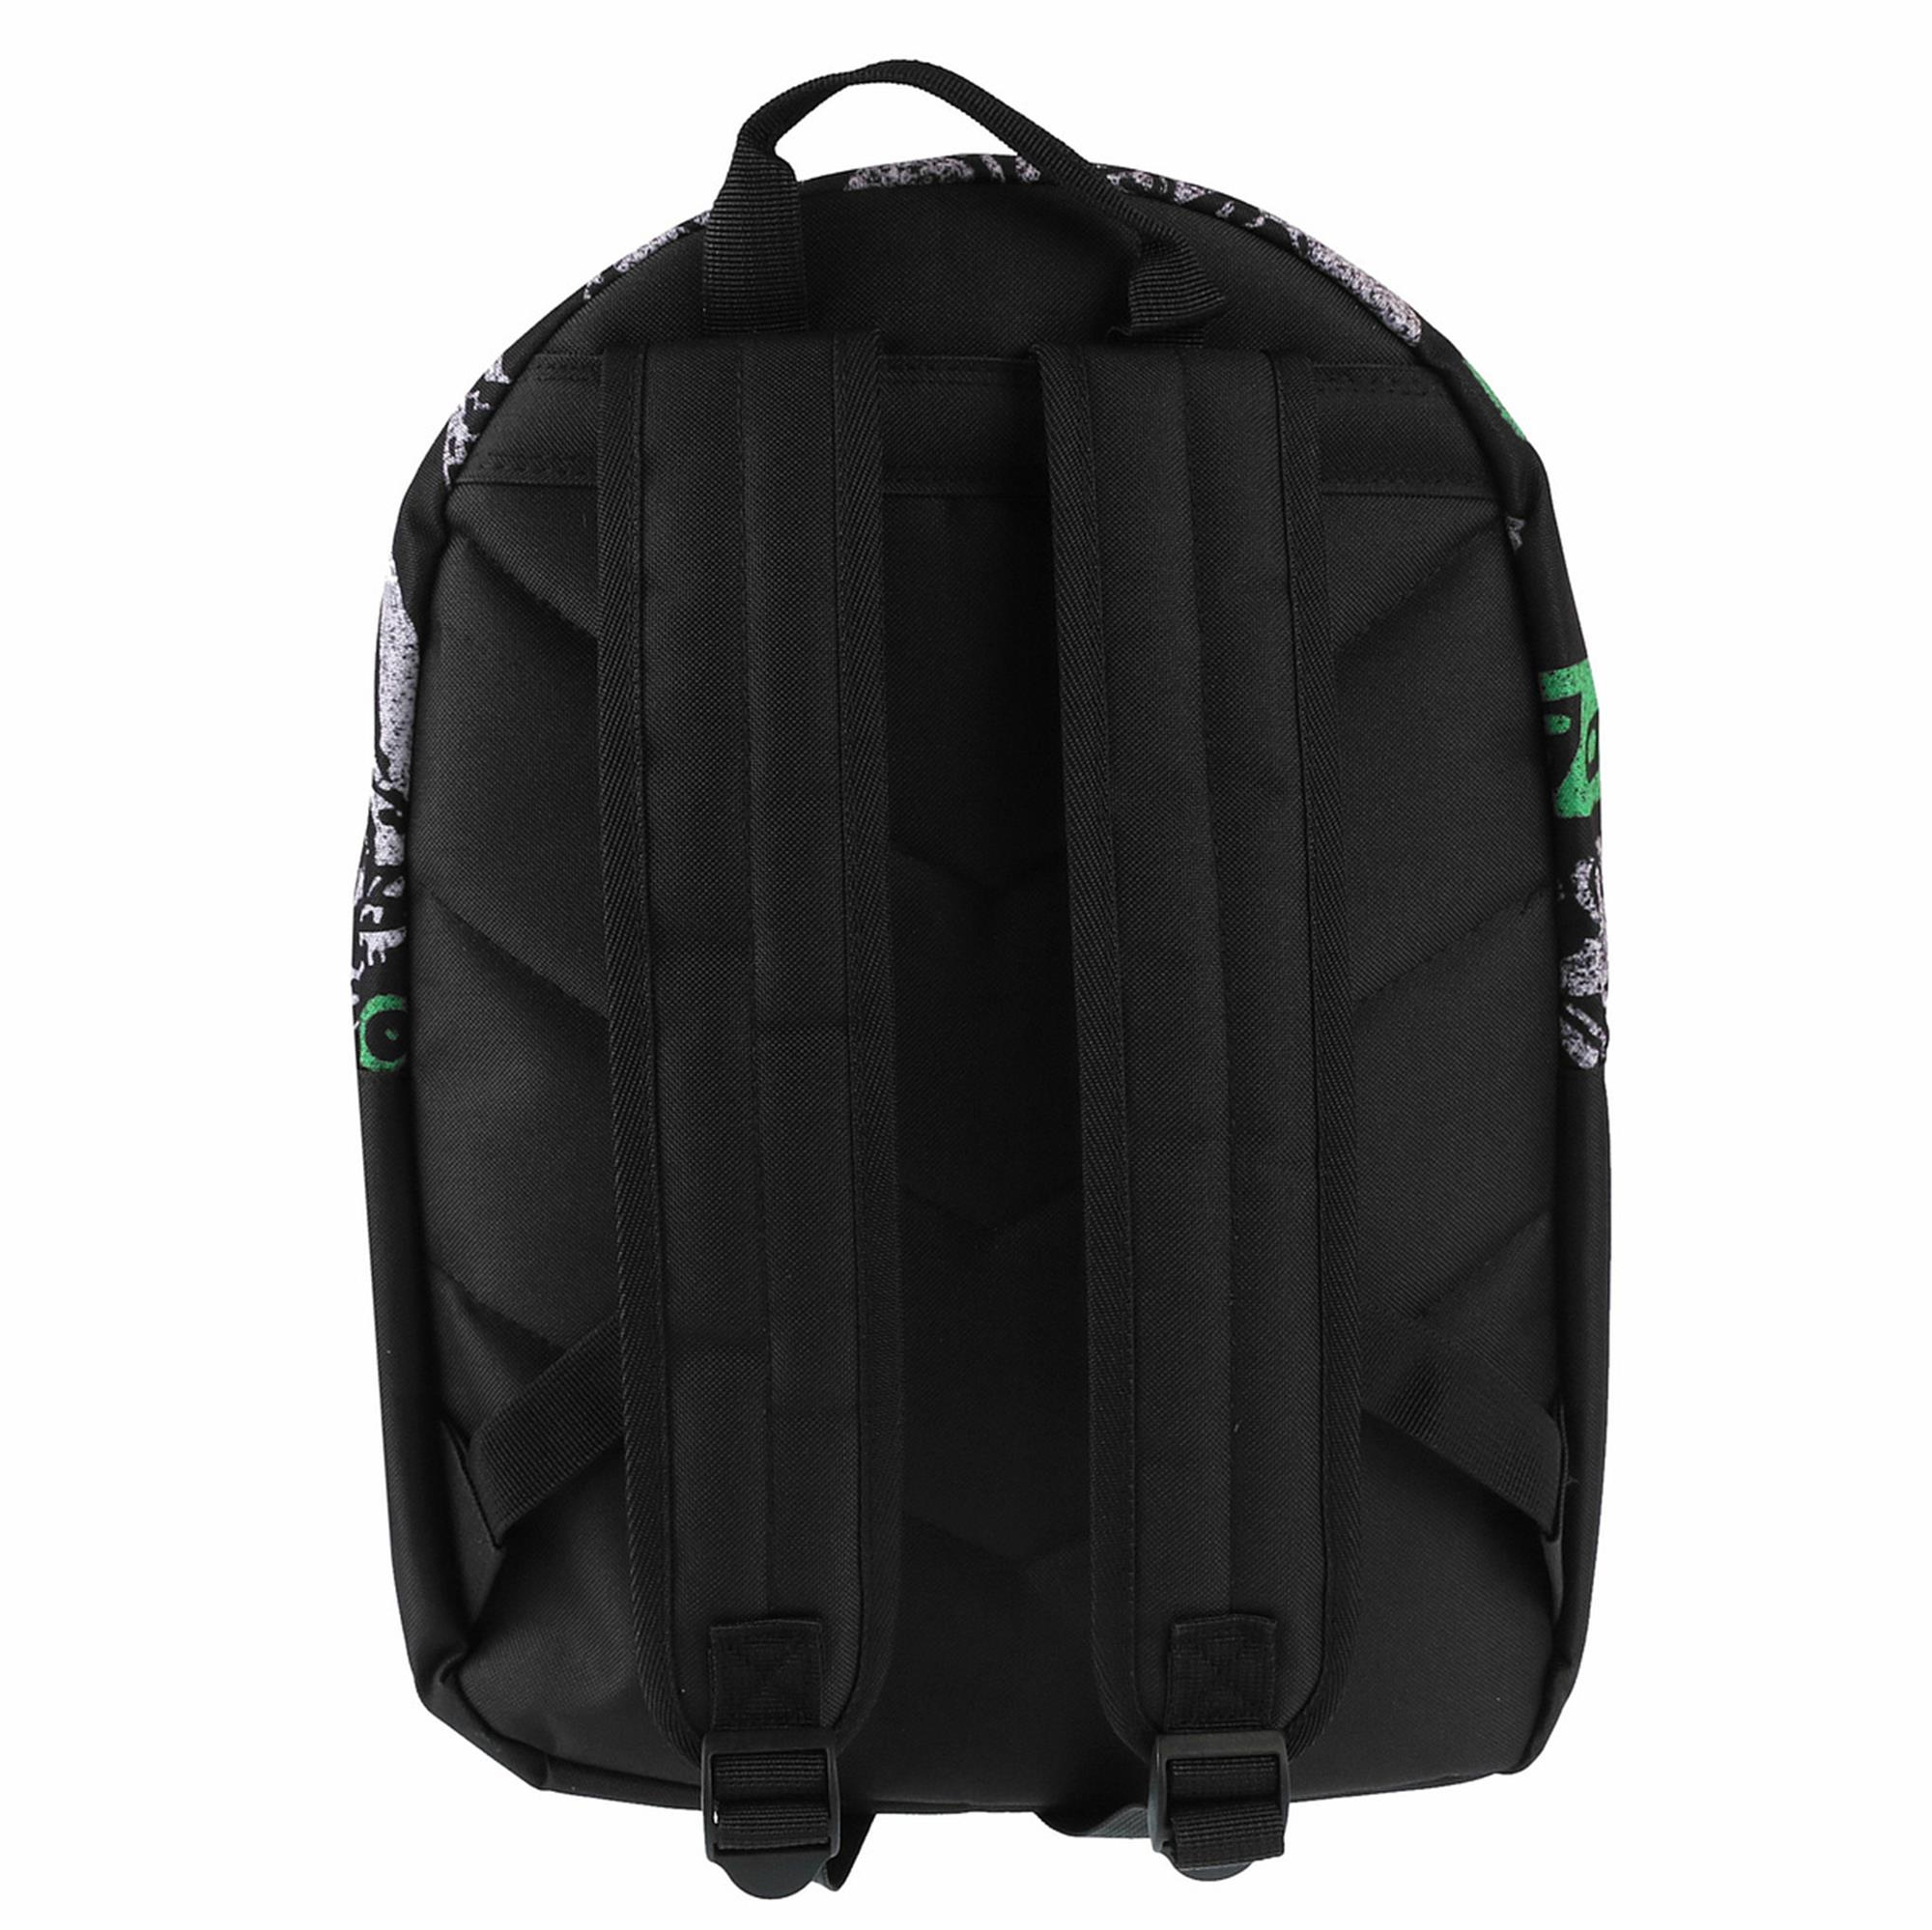 Mad Mad World Backpack